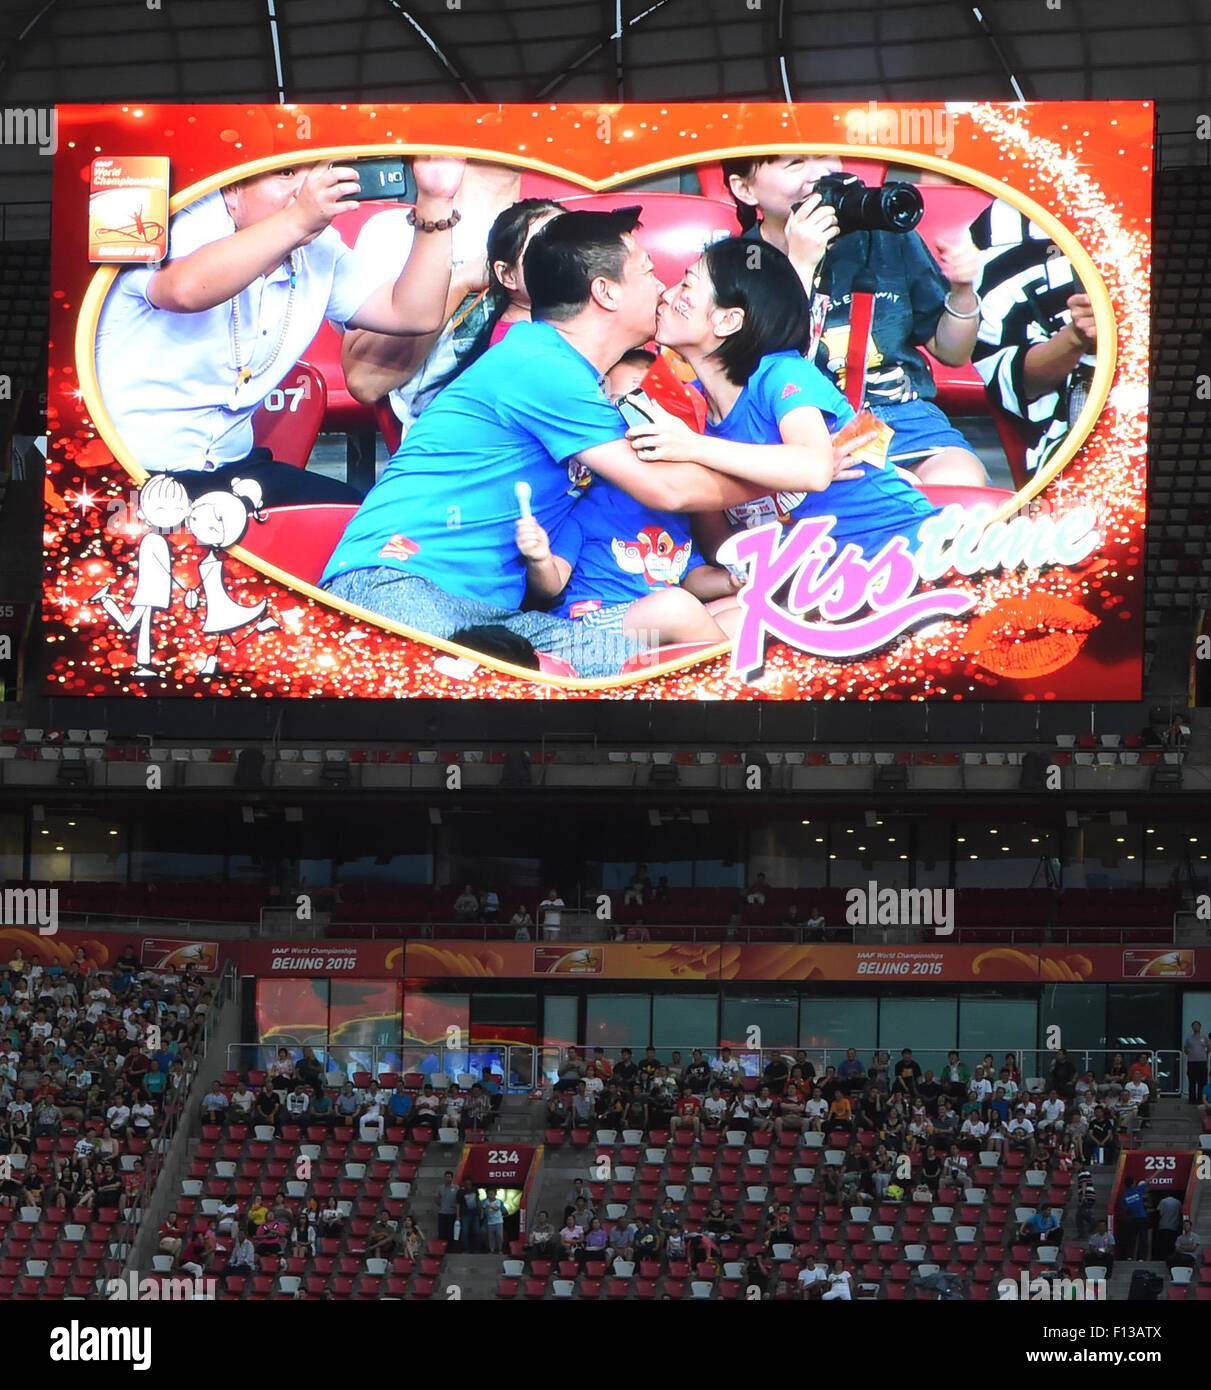 Beijing, China. 26th Aug, 2015. The screen in the stadium shows two parents kiss each other before the afternoon match of Day 5 at the 2015 IAAF World Championships at the 'Bird's Nest' National Stadium in Beijing, capital of China, Aug. 26, 2015. © Wang Haofei/Xinhua/Alamy Live News Stock Photo